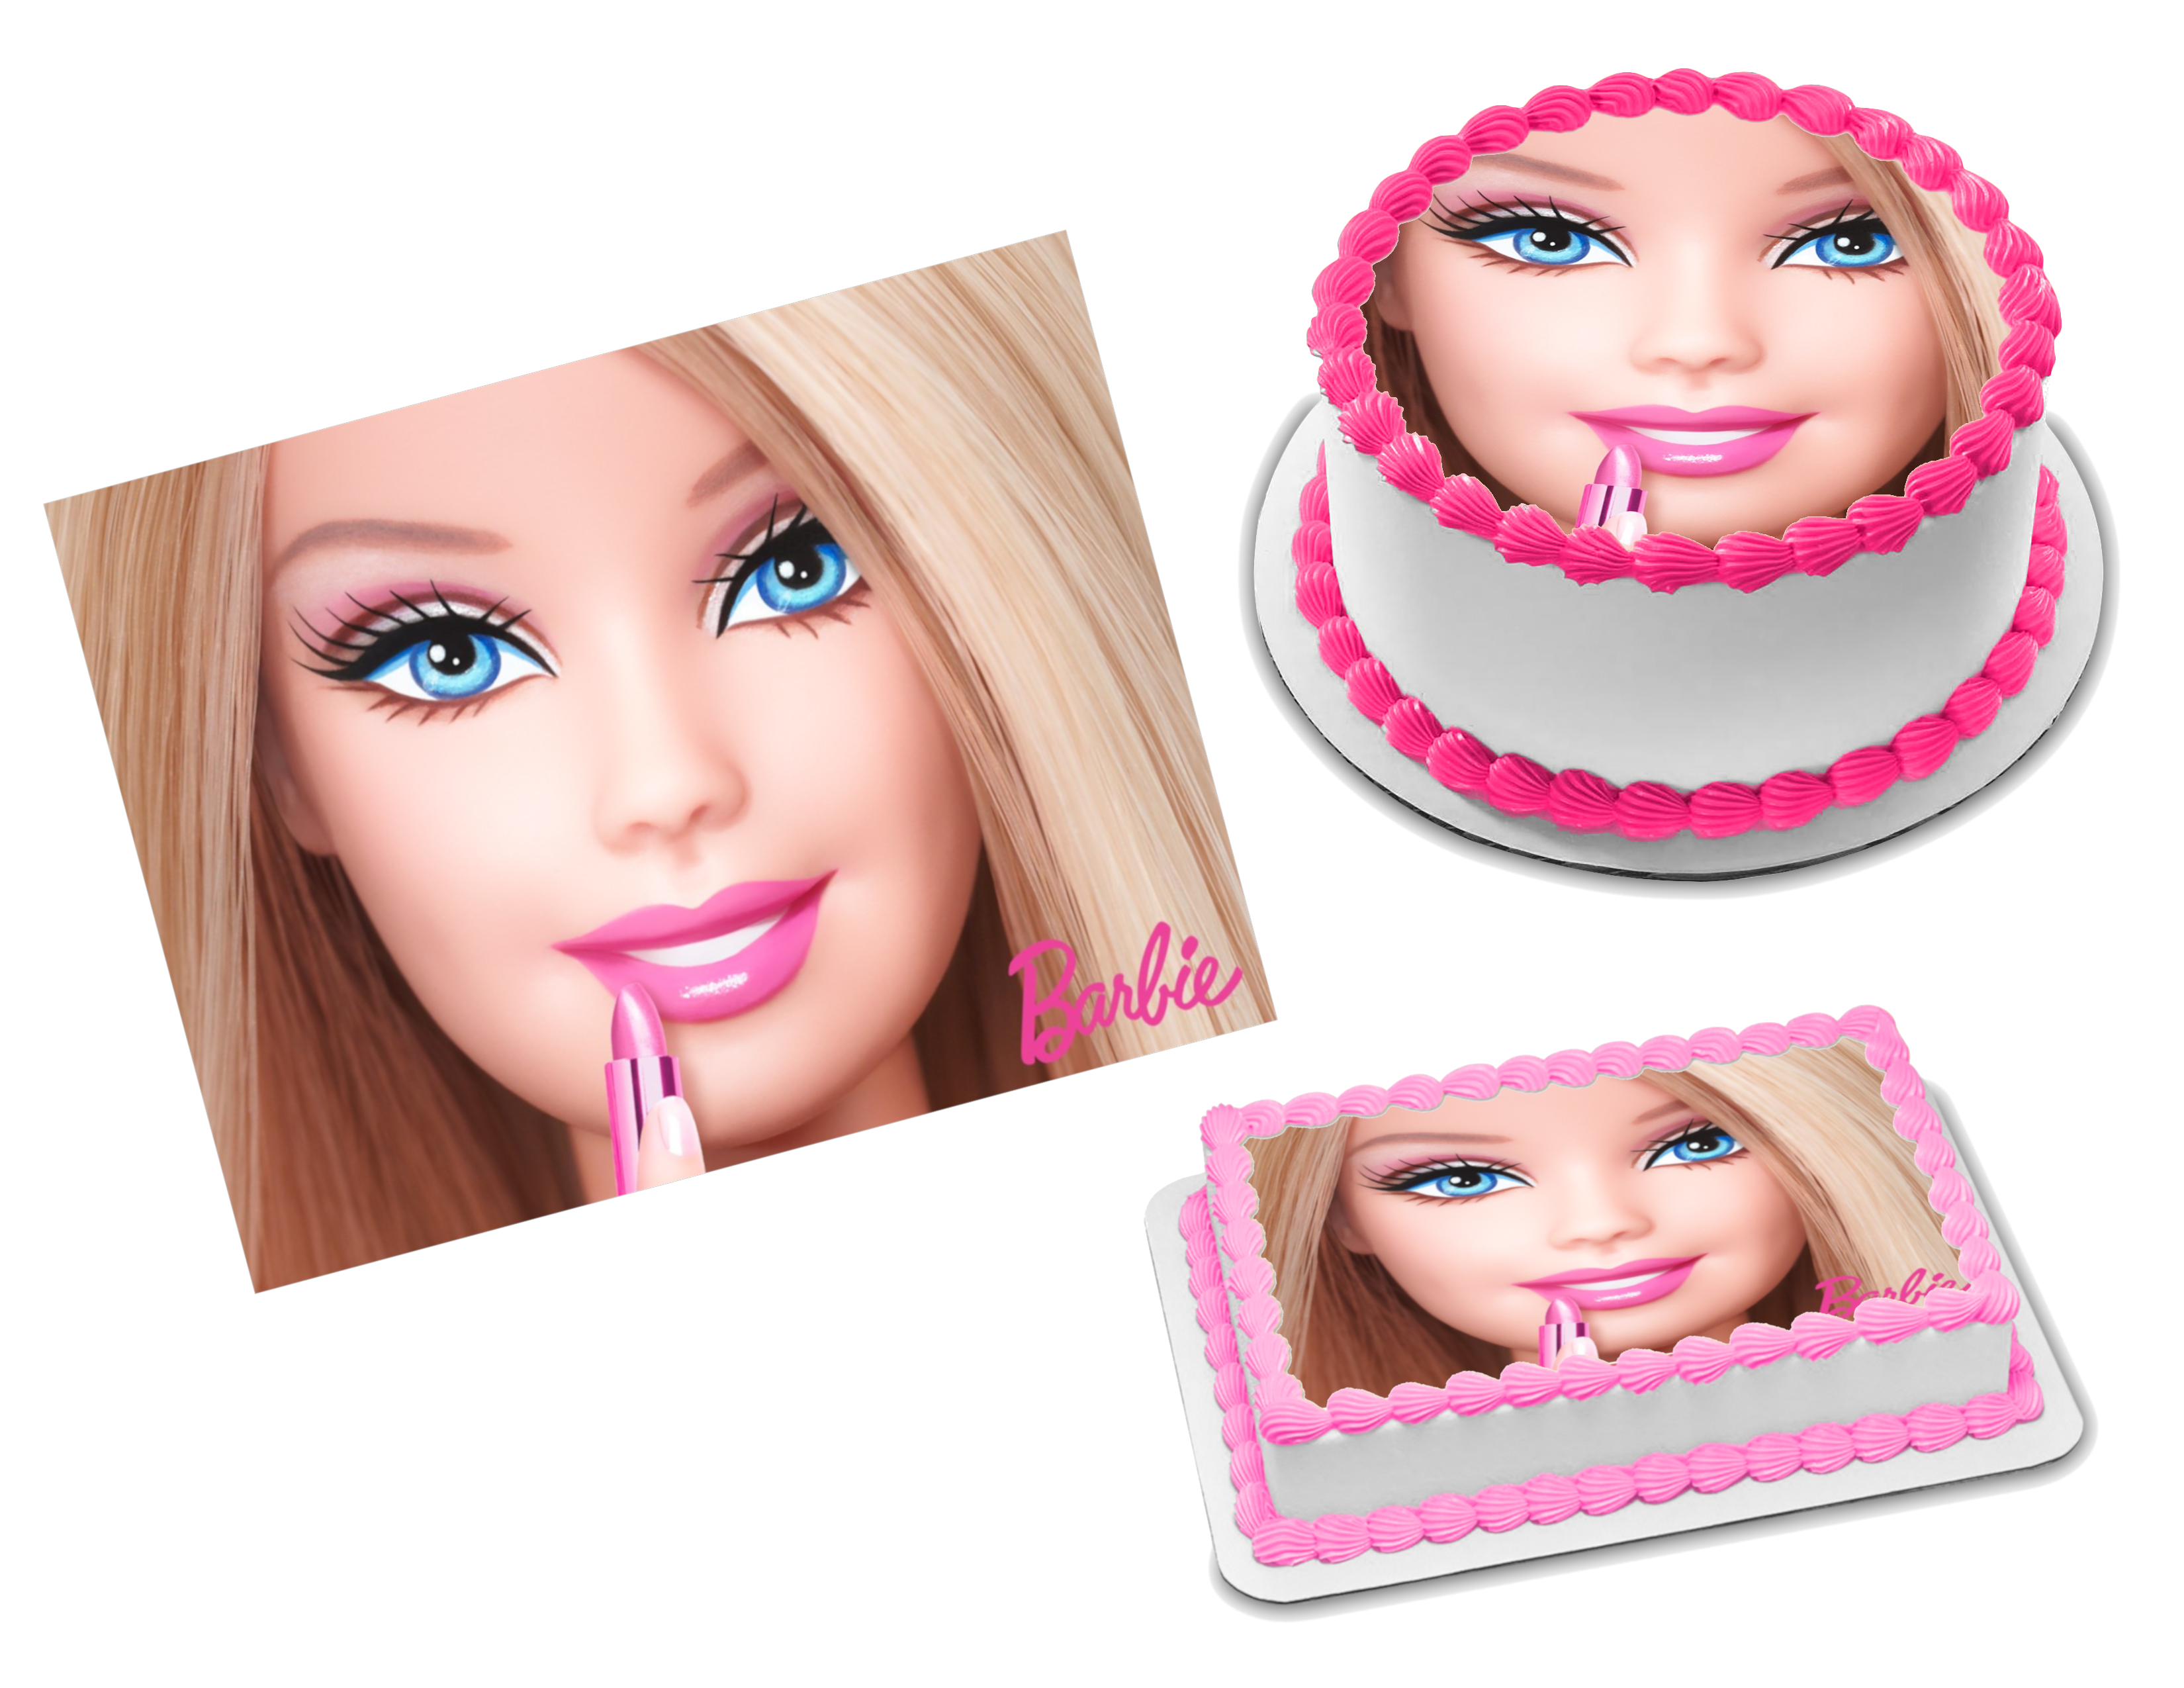 Barbie Cut Out Edible Cake Toppers, Edible Picture